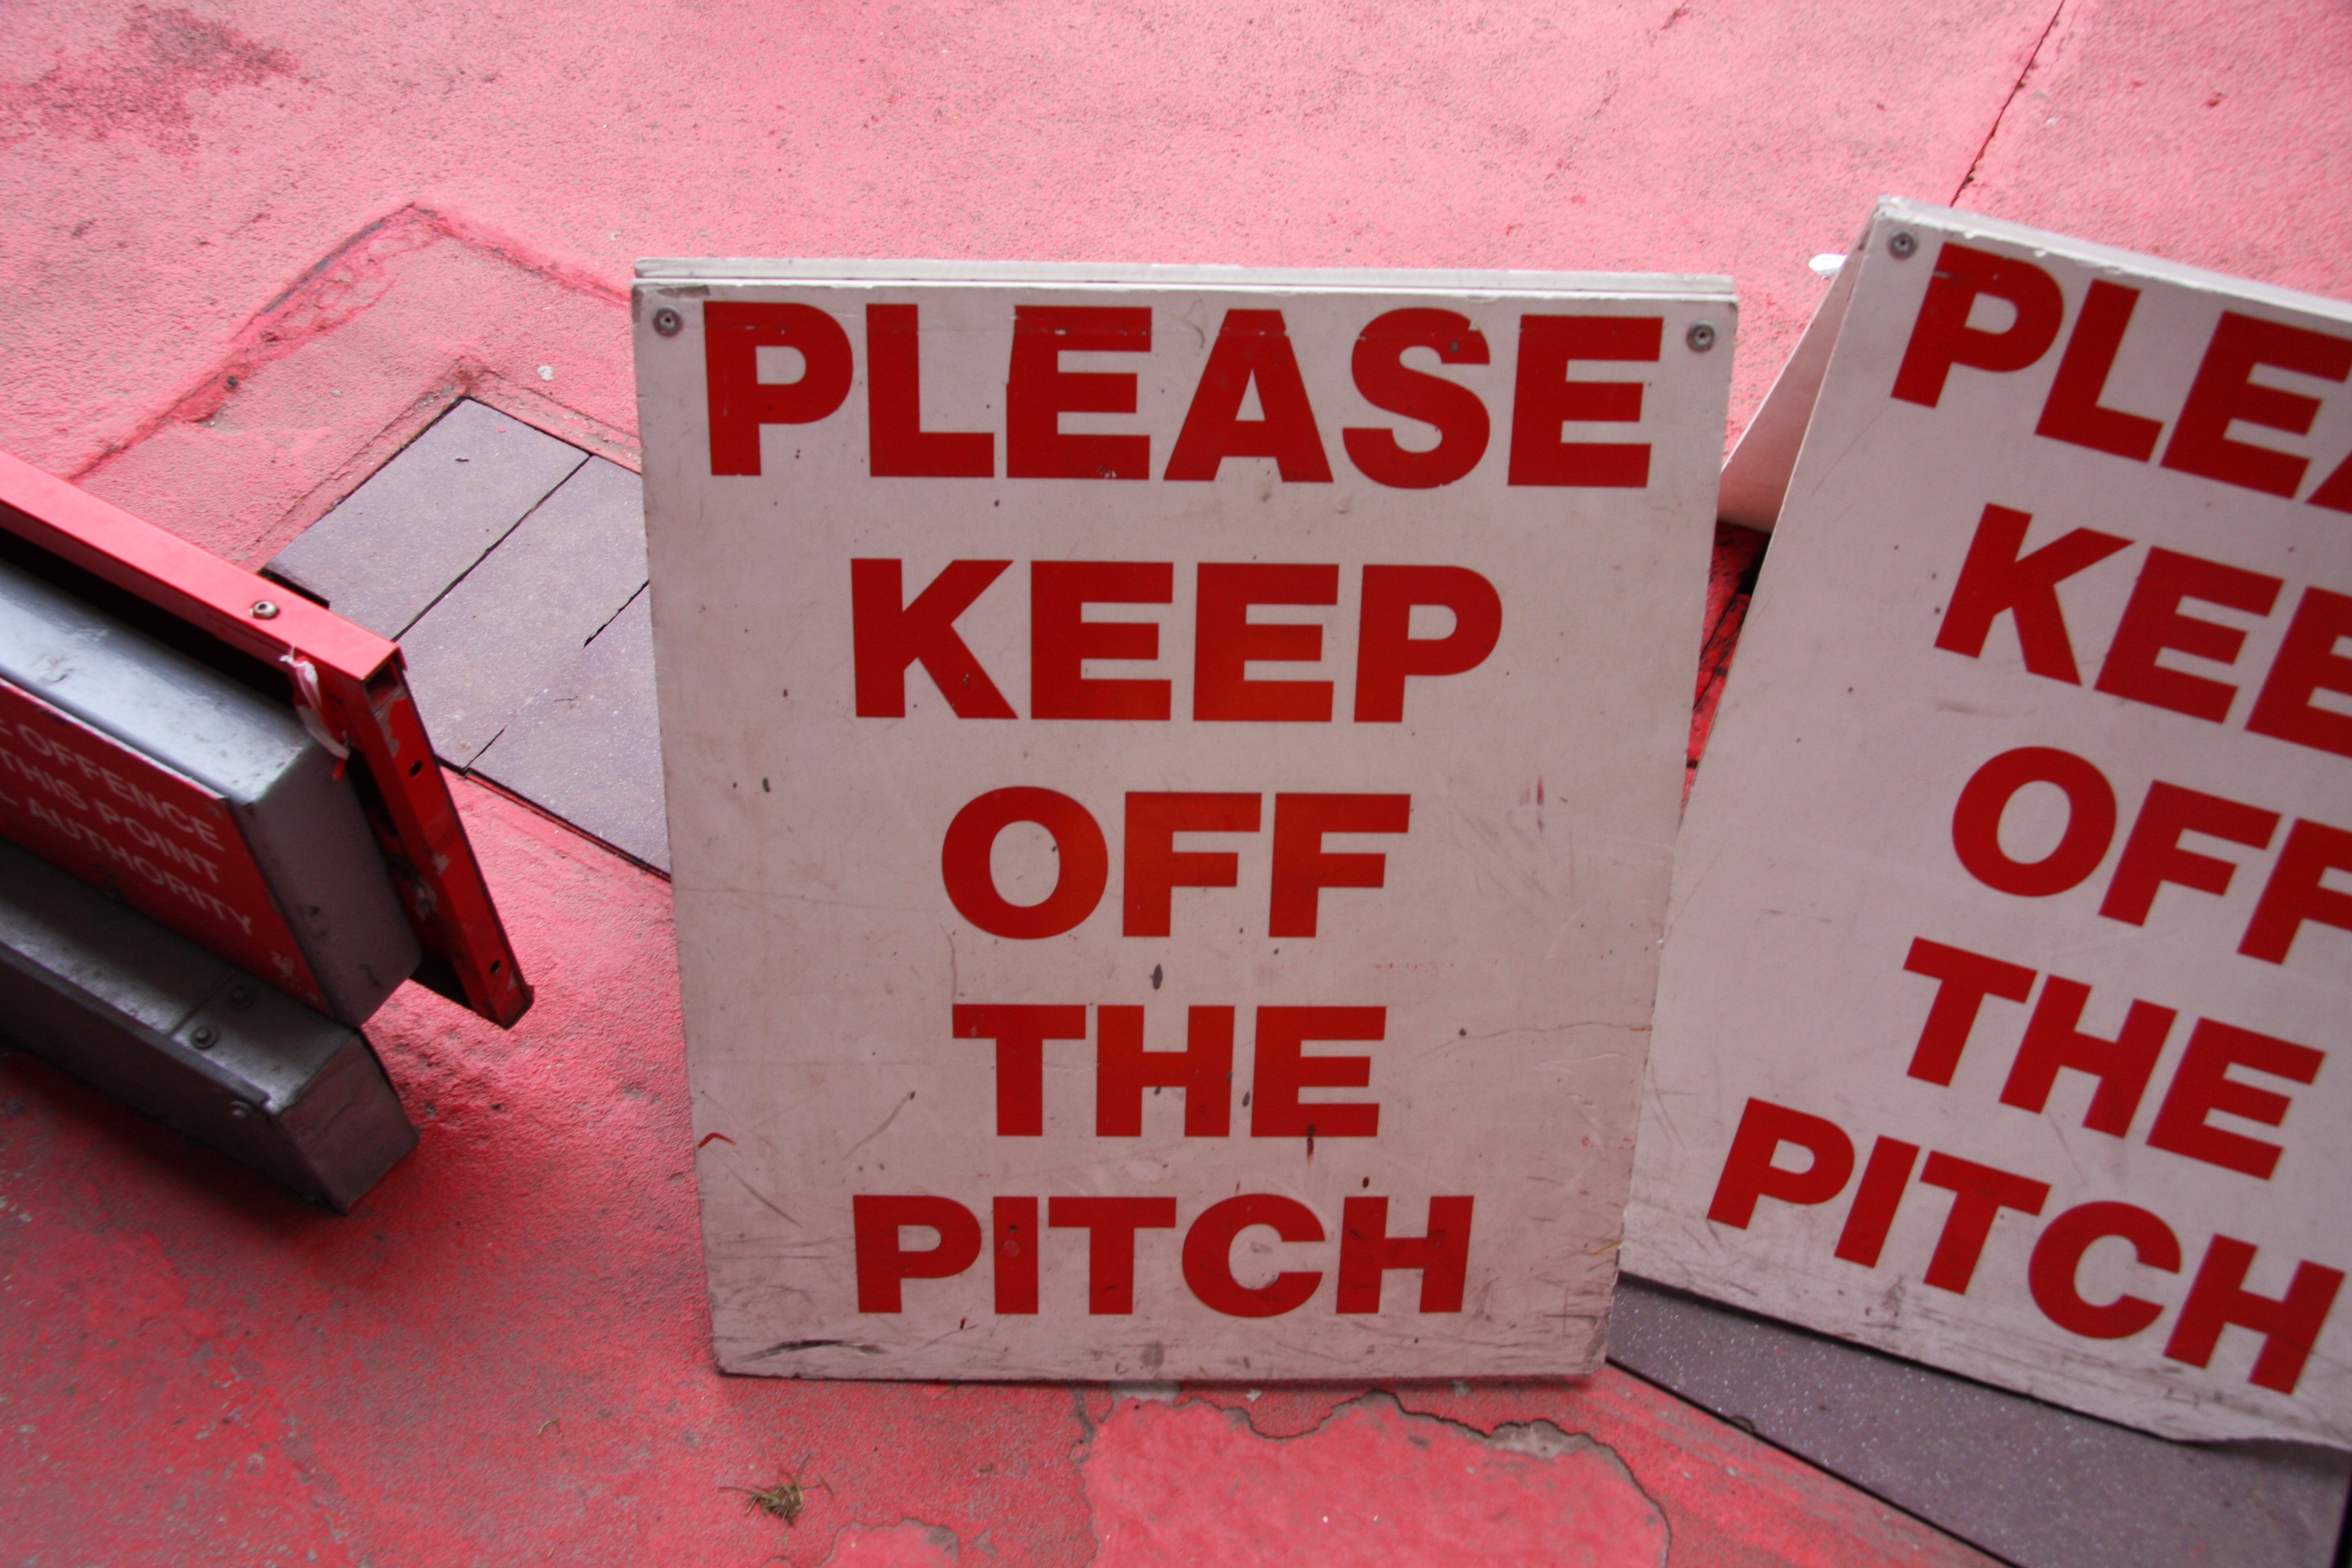 Please keep of the pitch